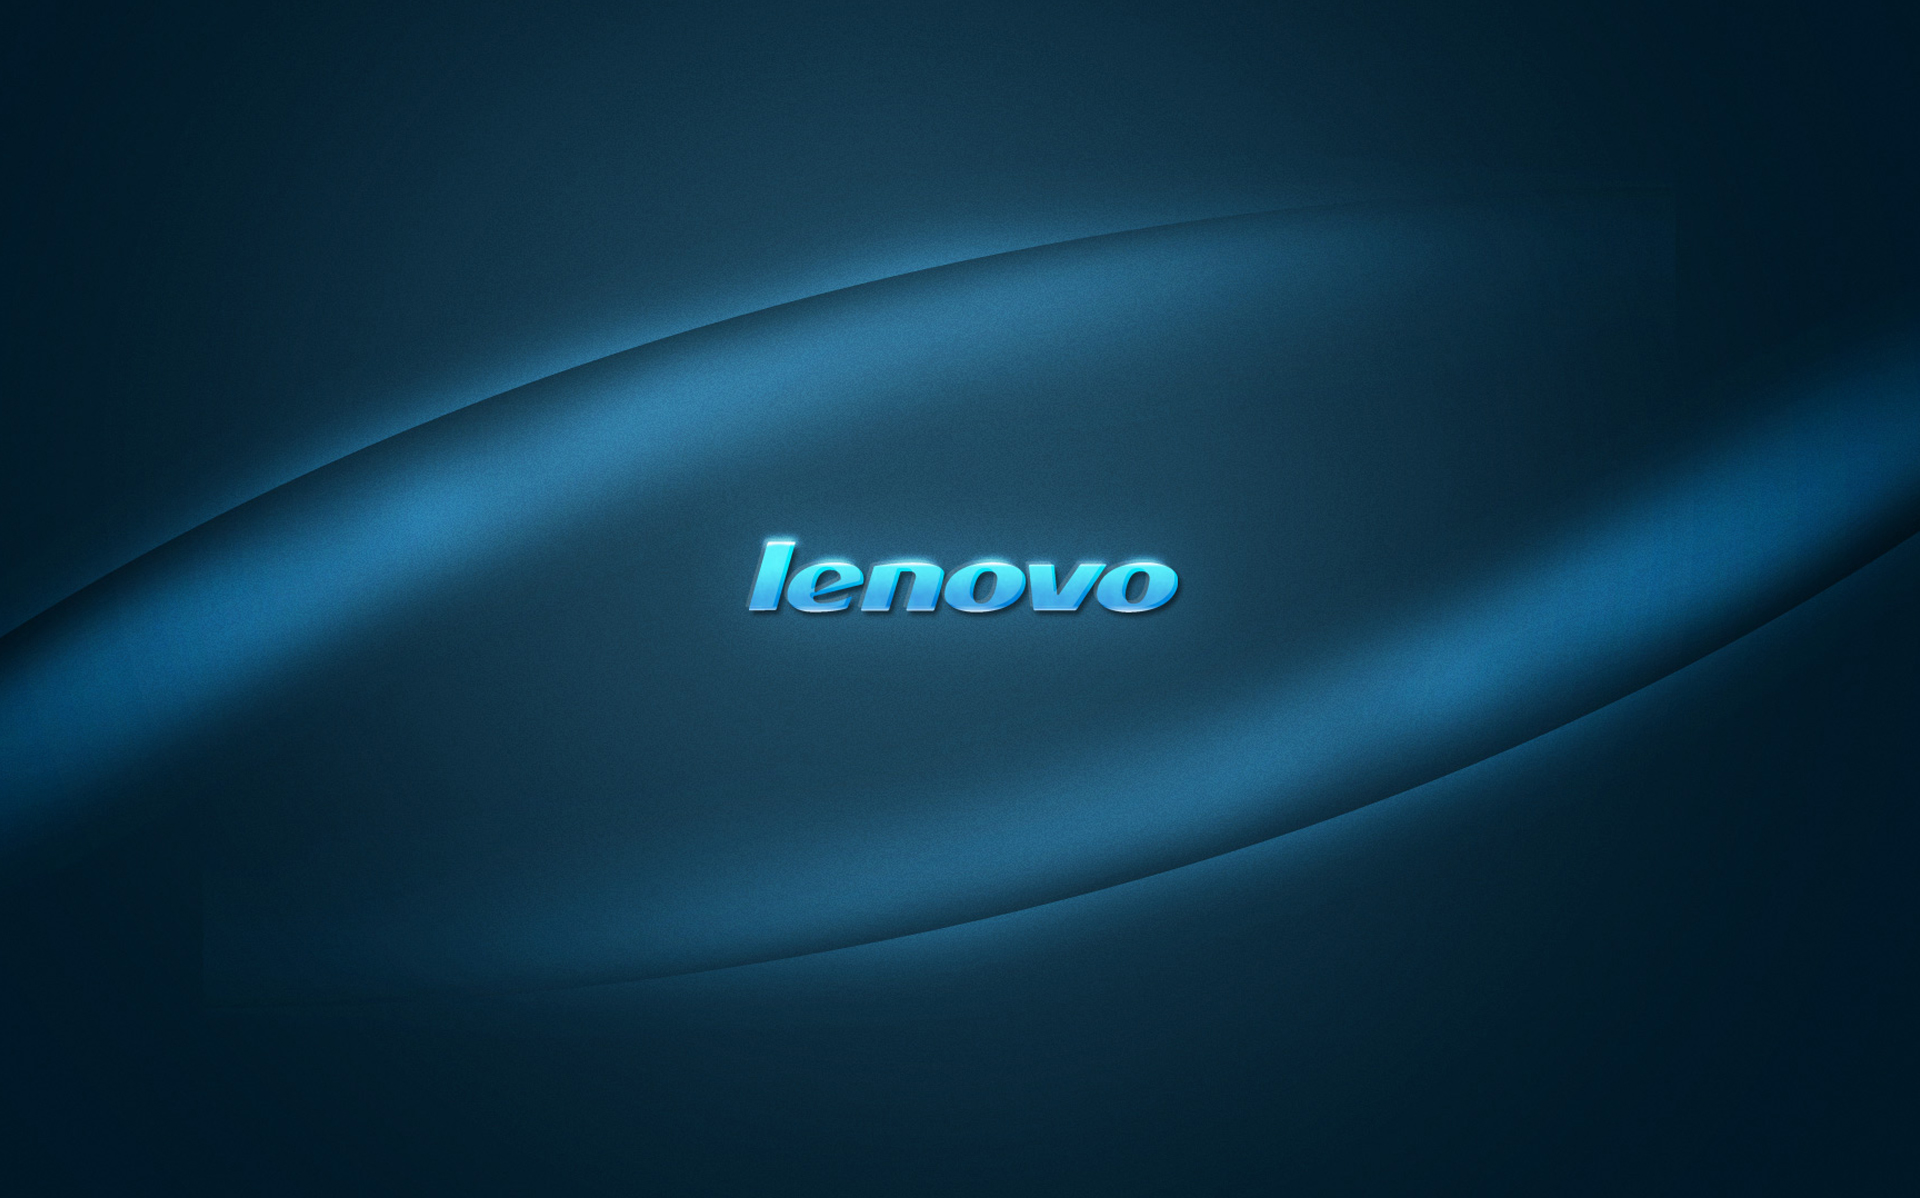 Lenovo Desktop Backgrounds Wallpapers 1 Recent Pictures For Coloring Iconcreator Info